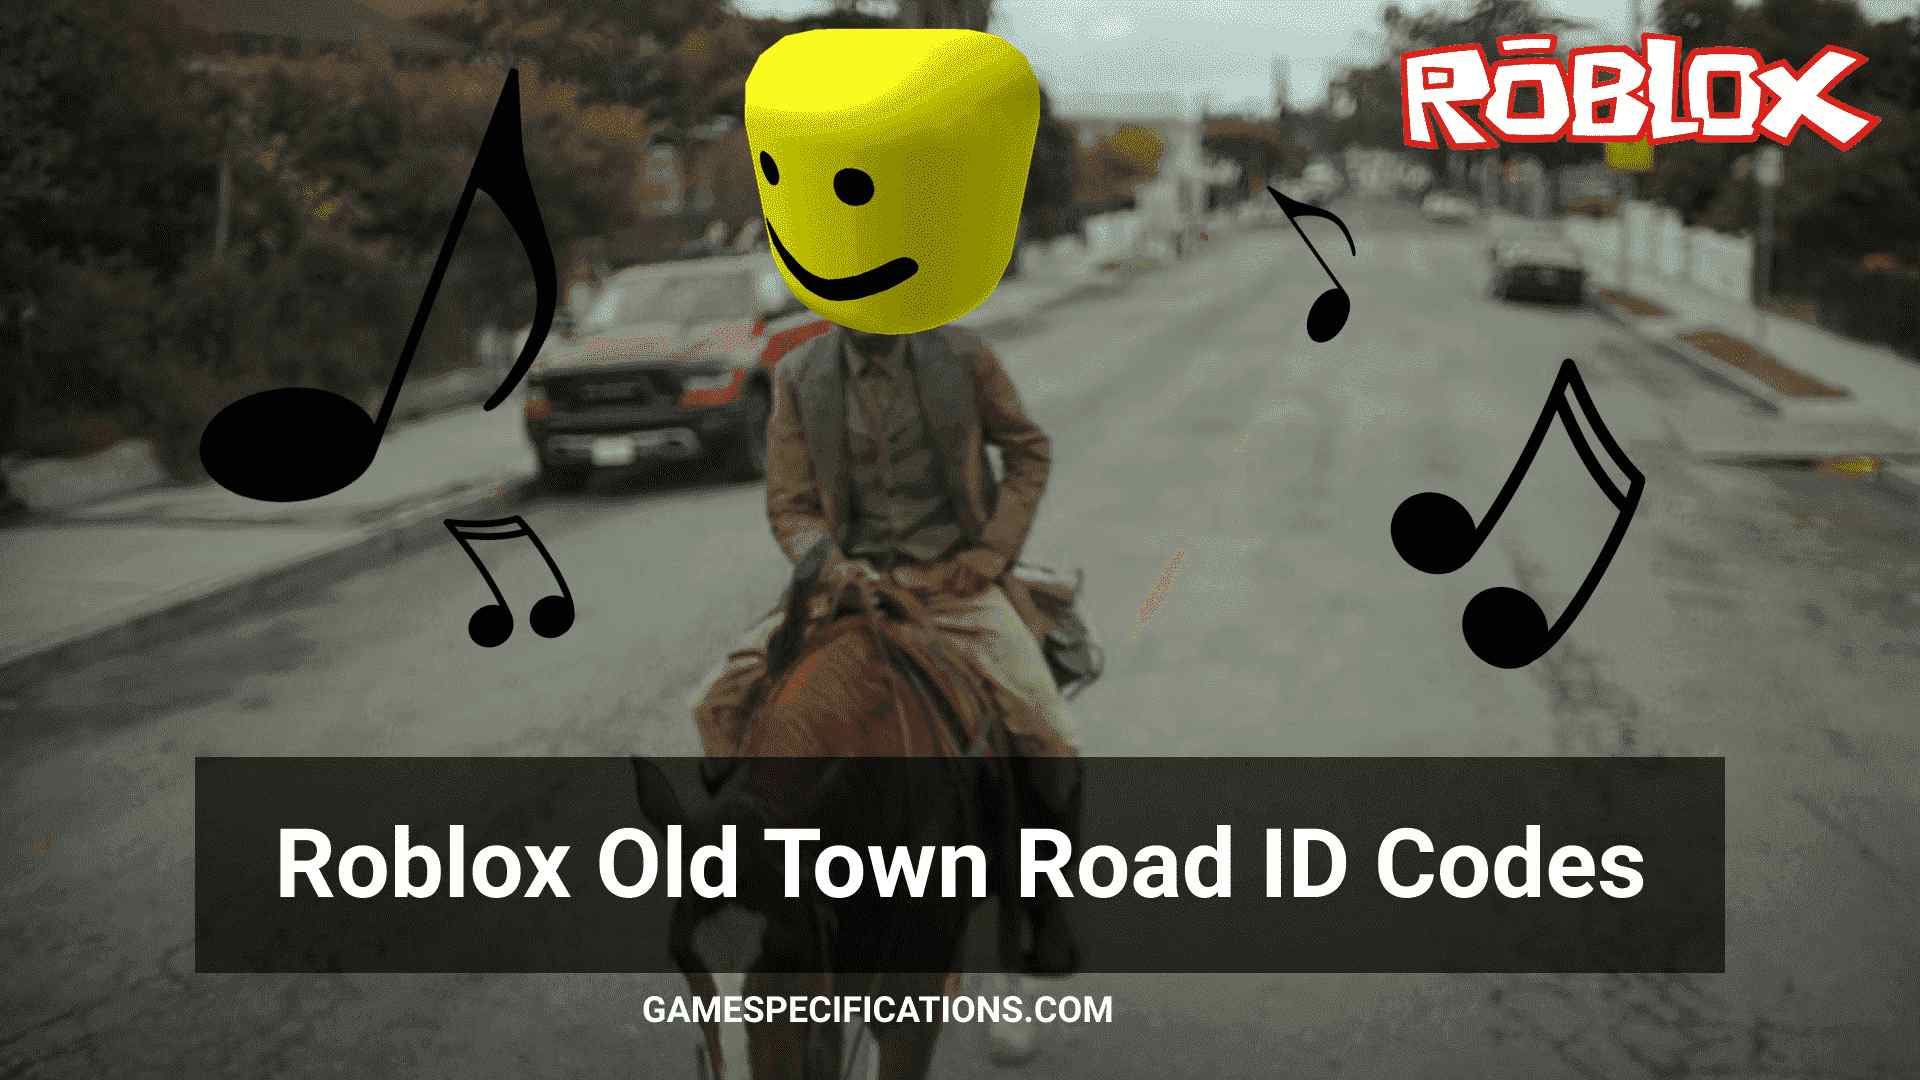 Ohtbreqjb6zwm - roblox off sound old town road